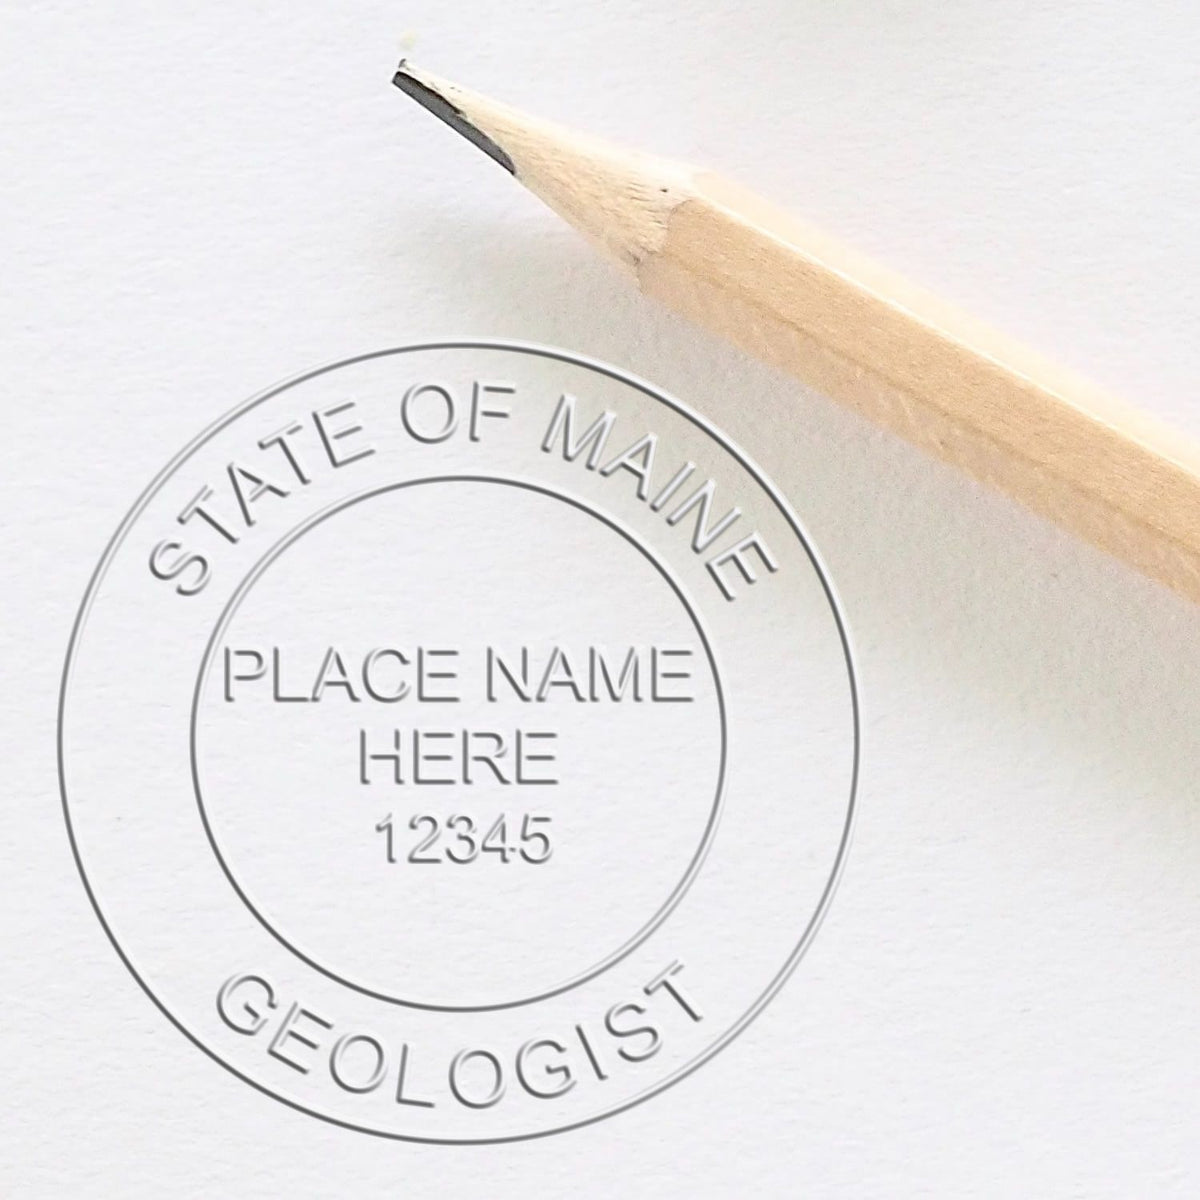 An in use photo of the Hybrid Maine Geologist Seal showing a sample imprint on a cardstock